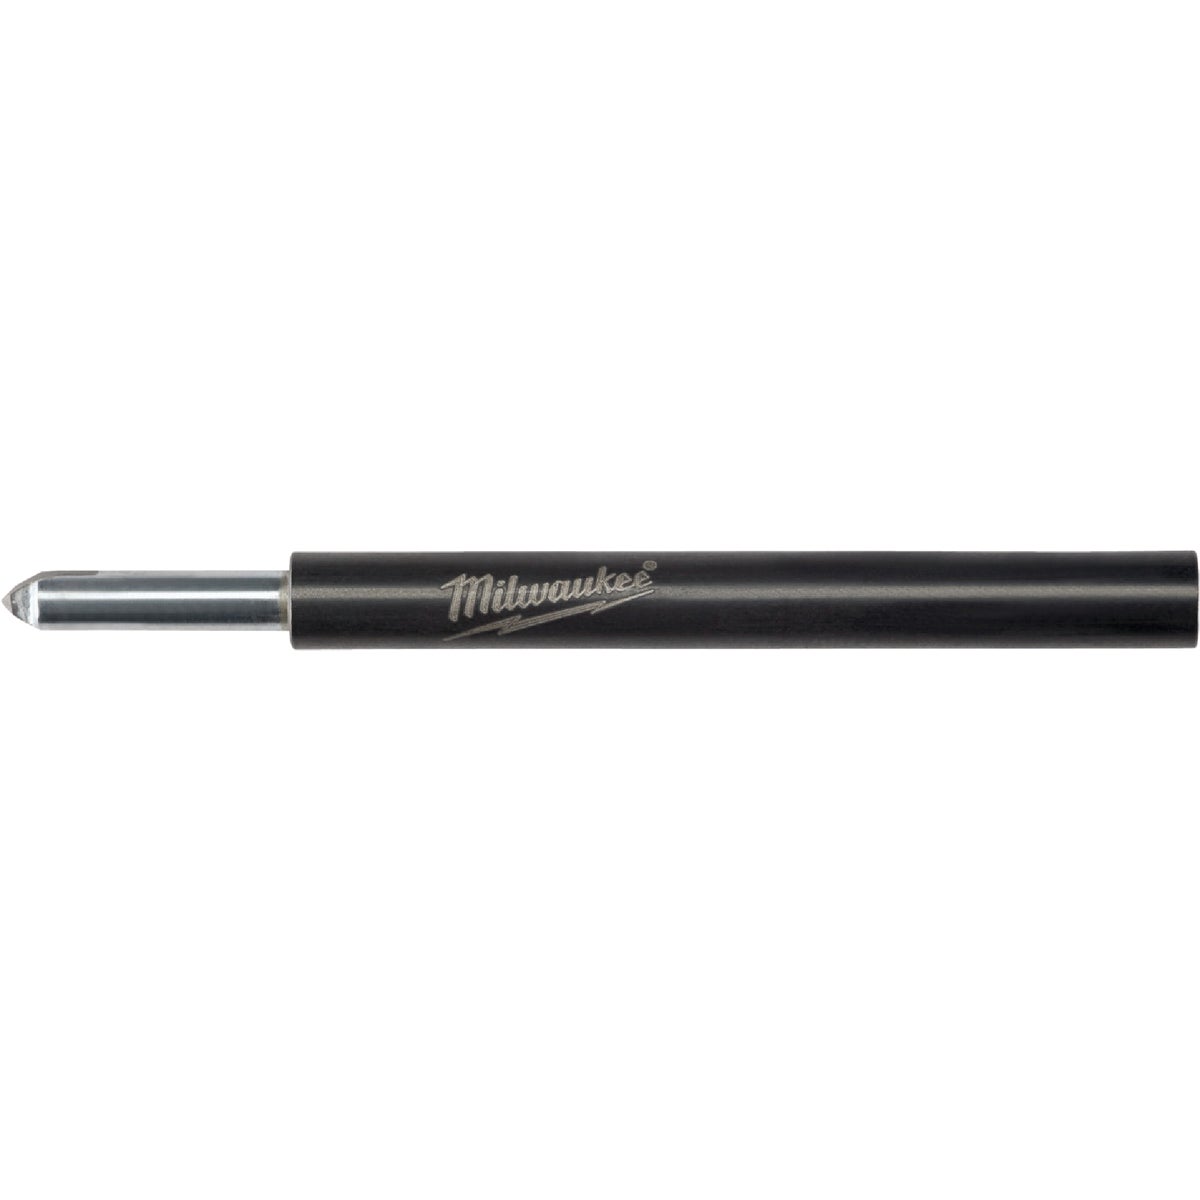 Item 302623, Retractable starter bit provides accurate centering in less time when 